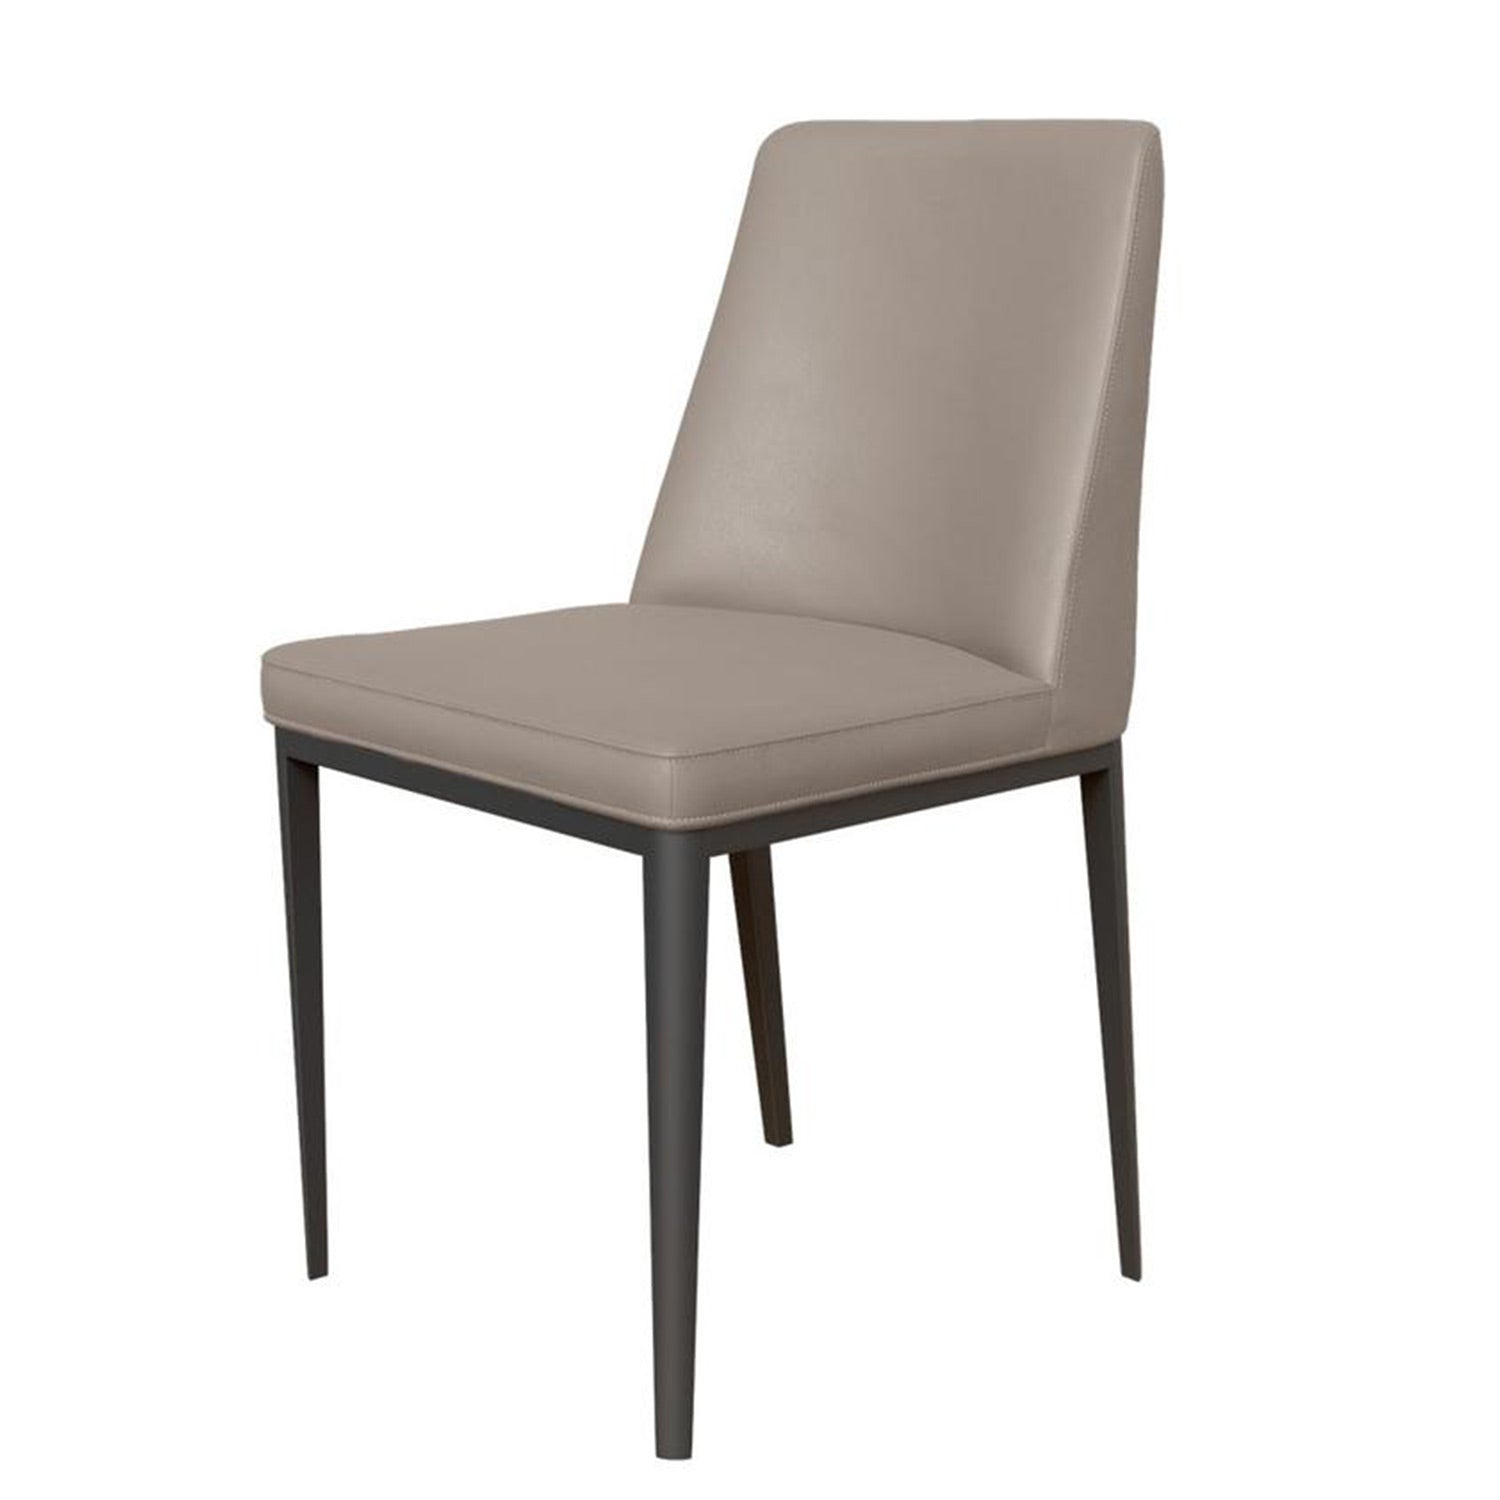 Moriano dining chair - exhibit